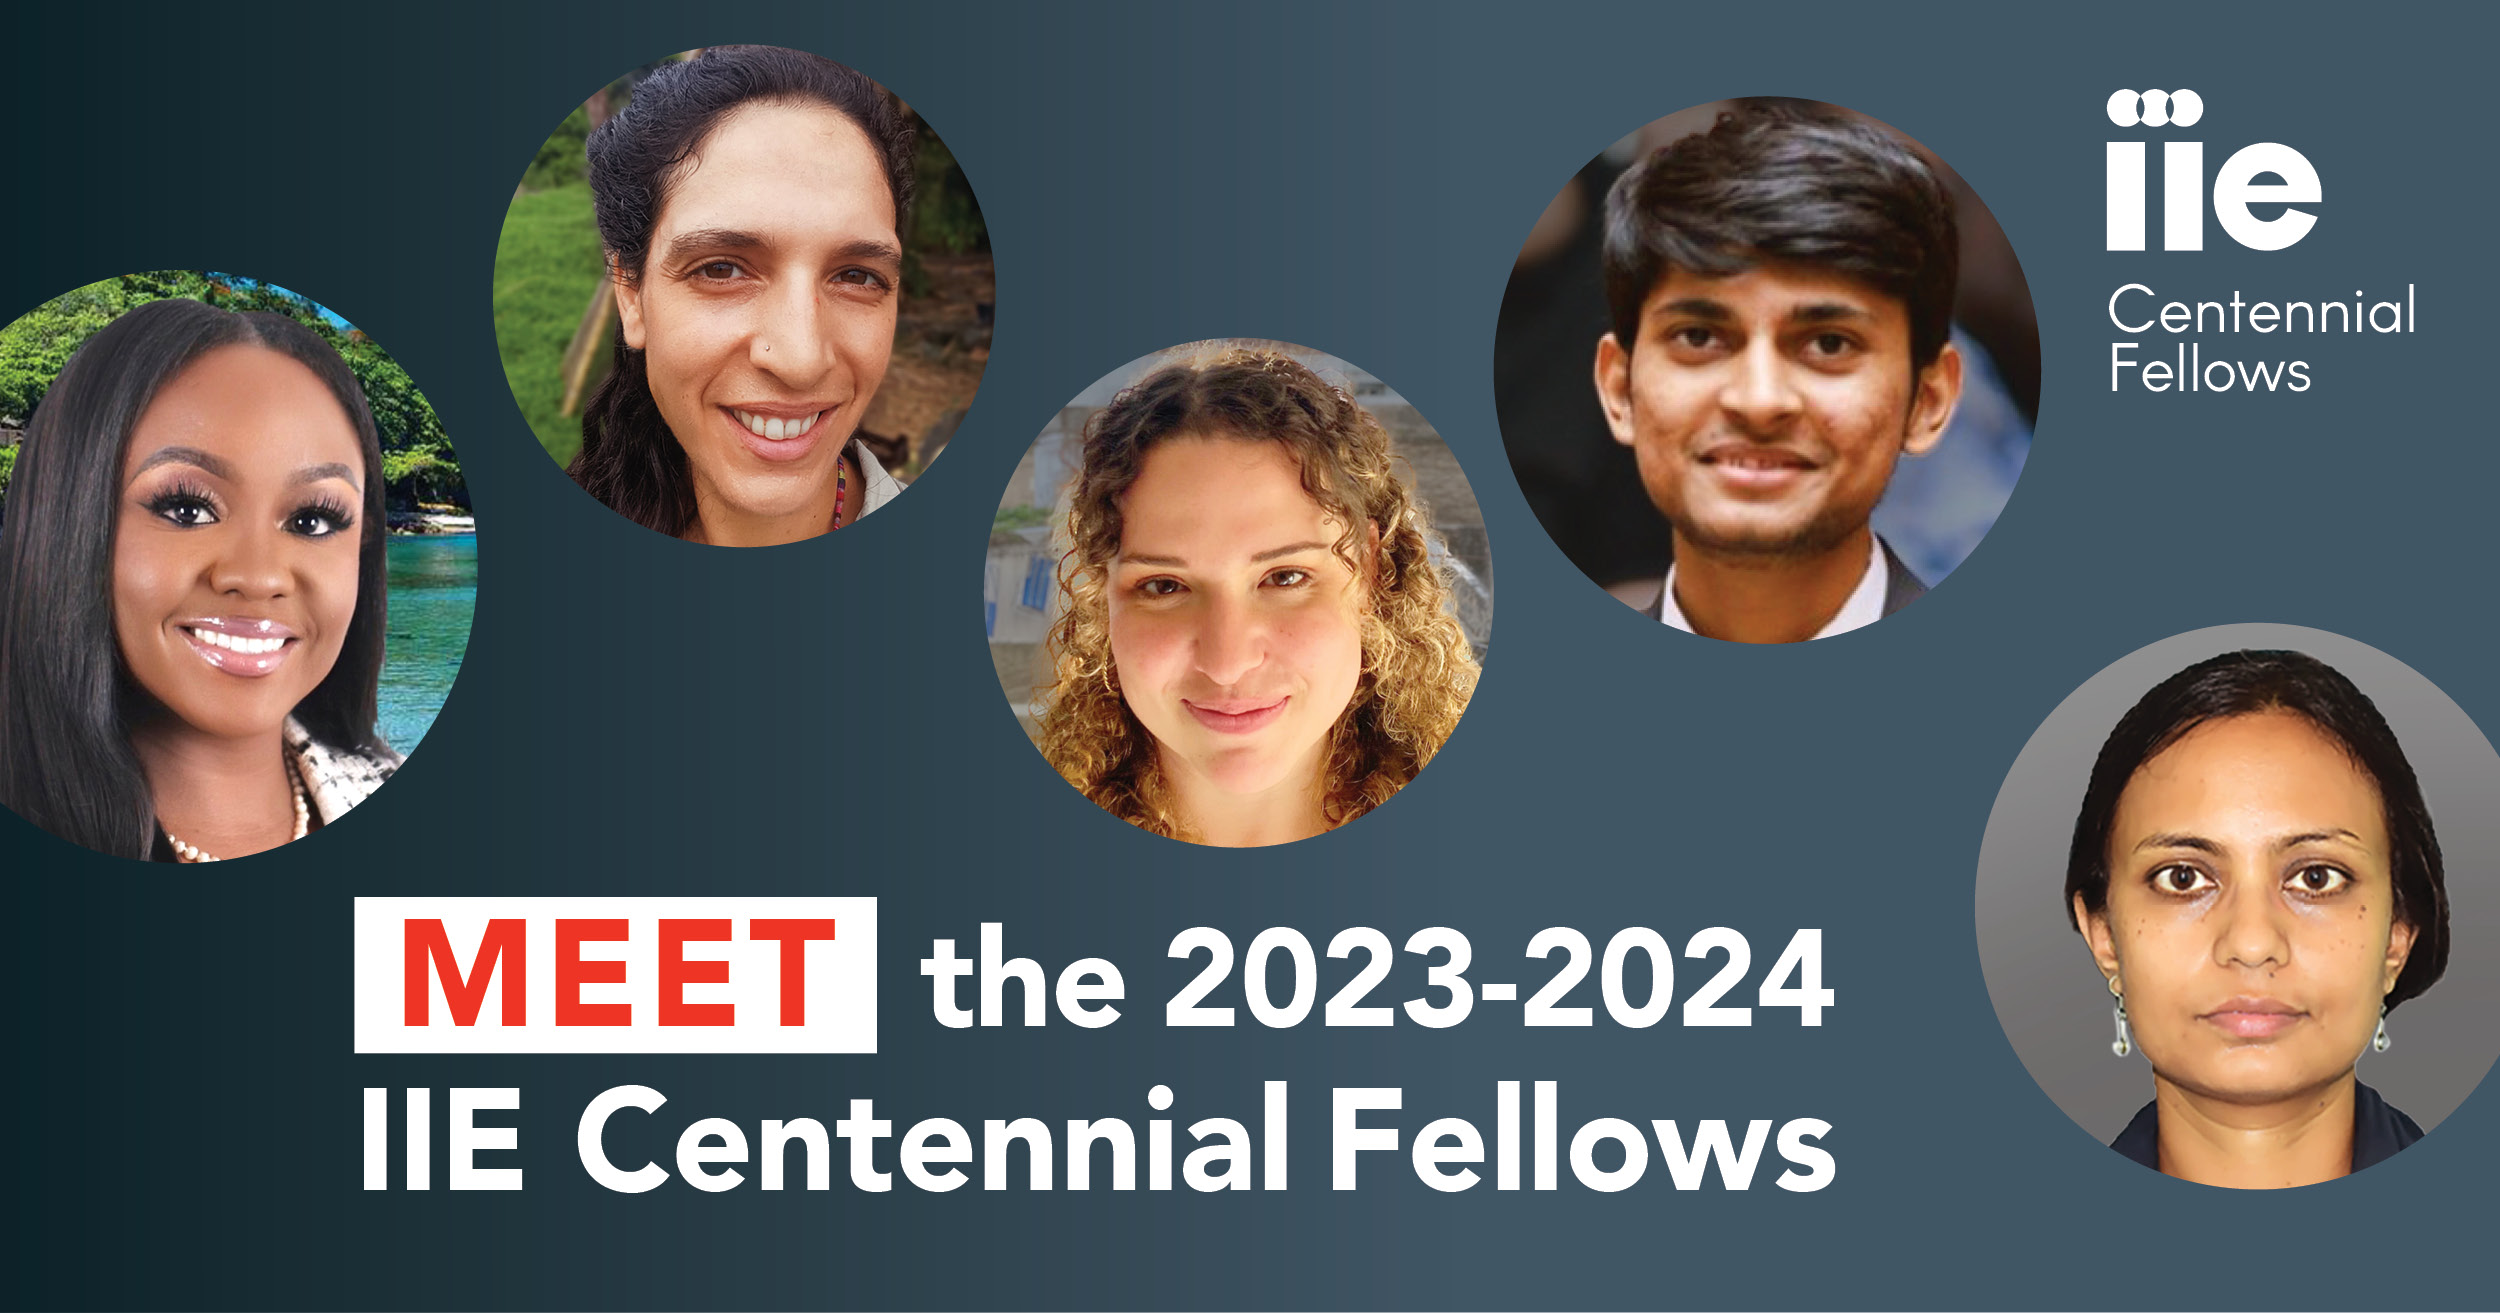 Graphic with gray background showing headshots of 5 people, captioned Meet the 2023-2024 IIE Centennial Fellows